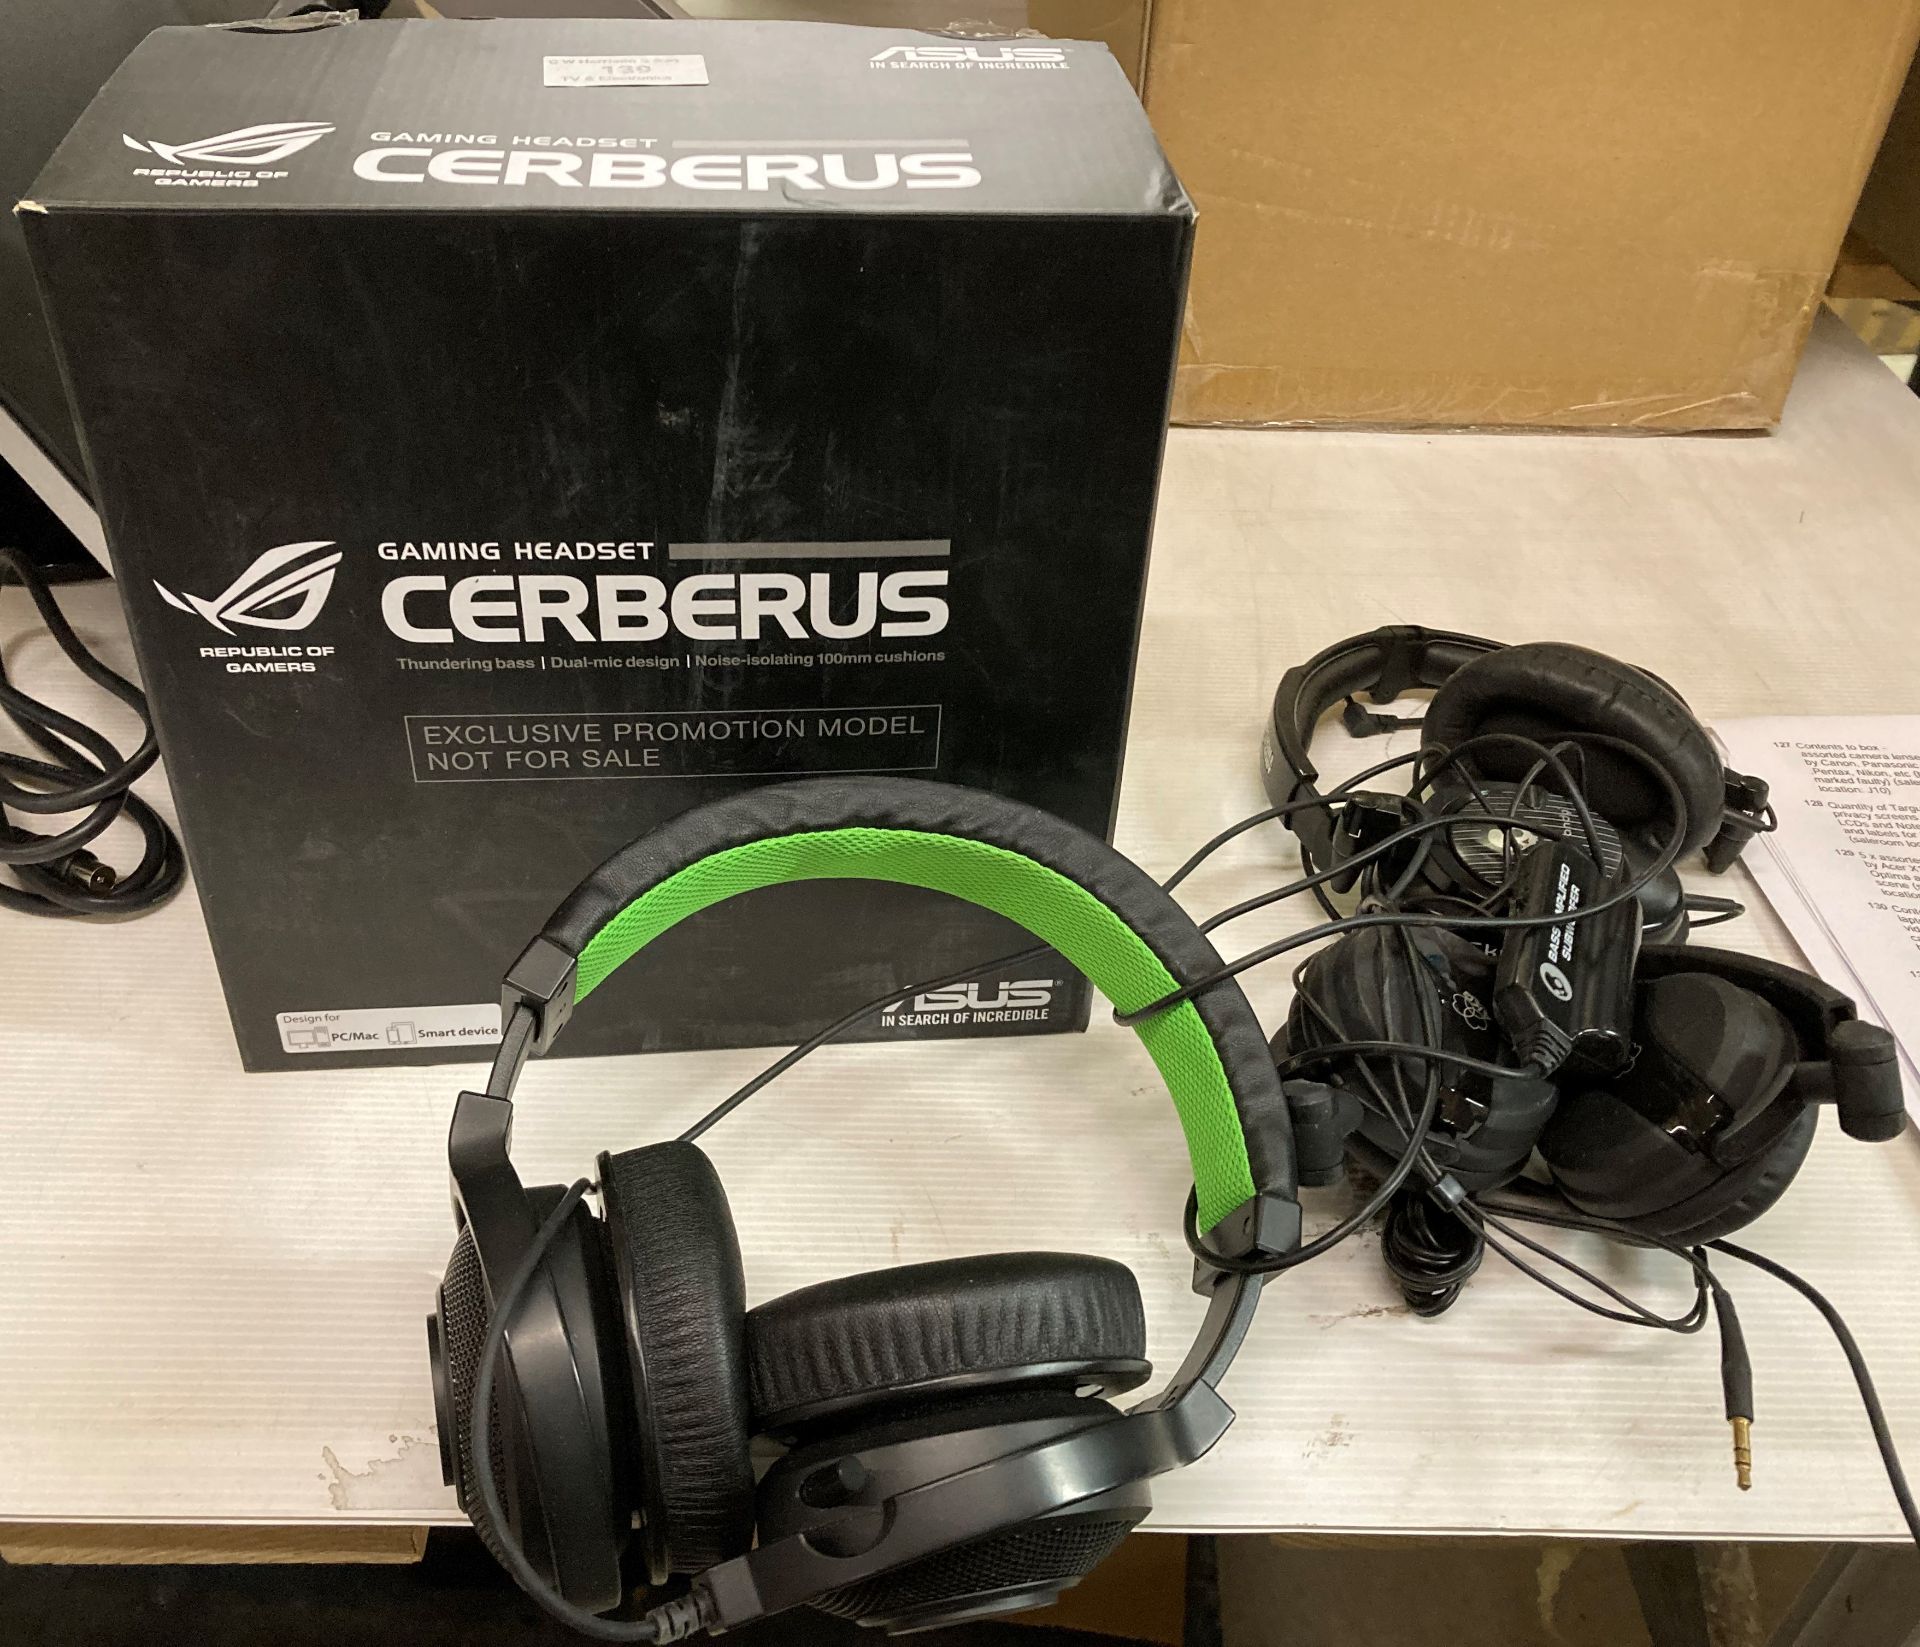 4 x pairs of plug-in Gaming headsets by Asus Cerberus,